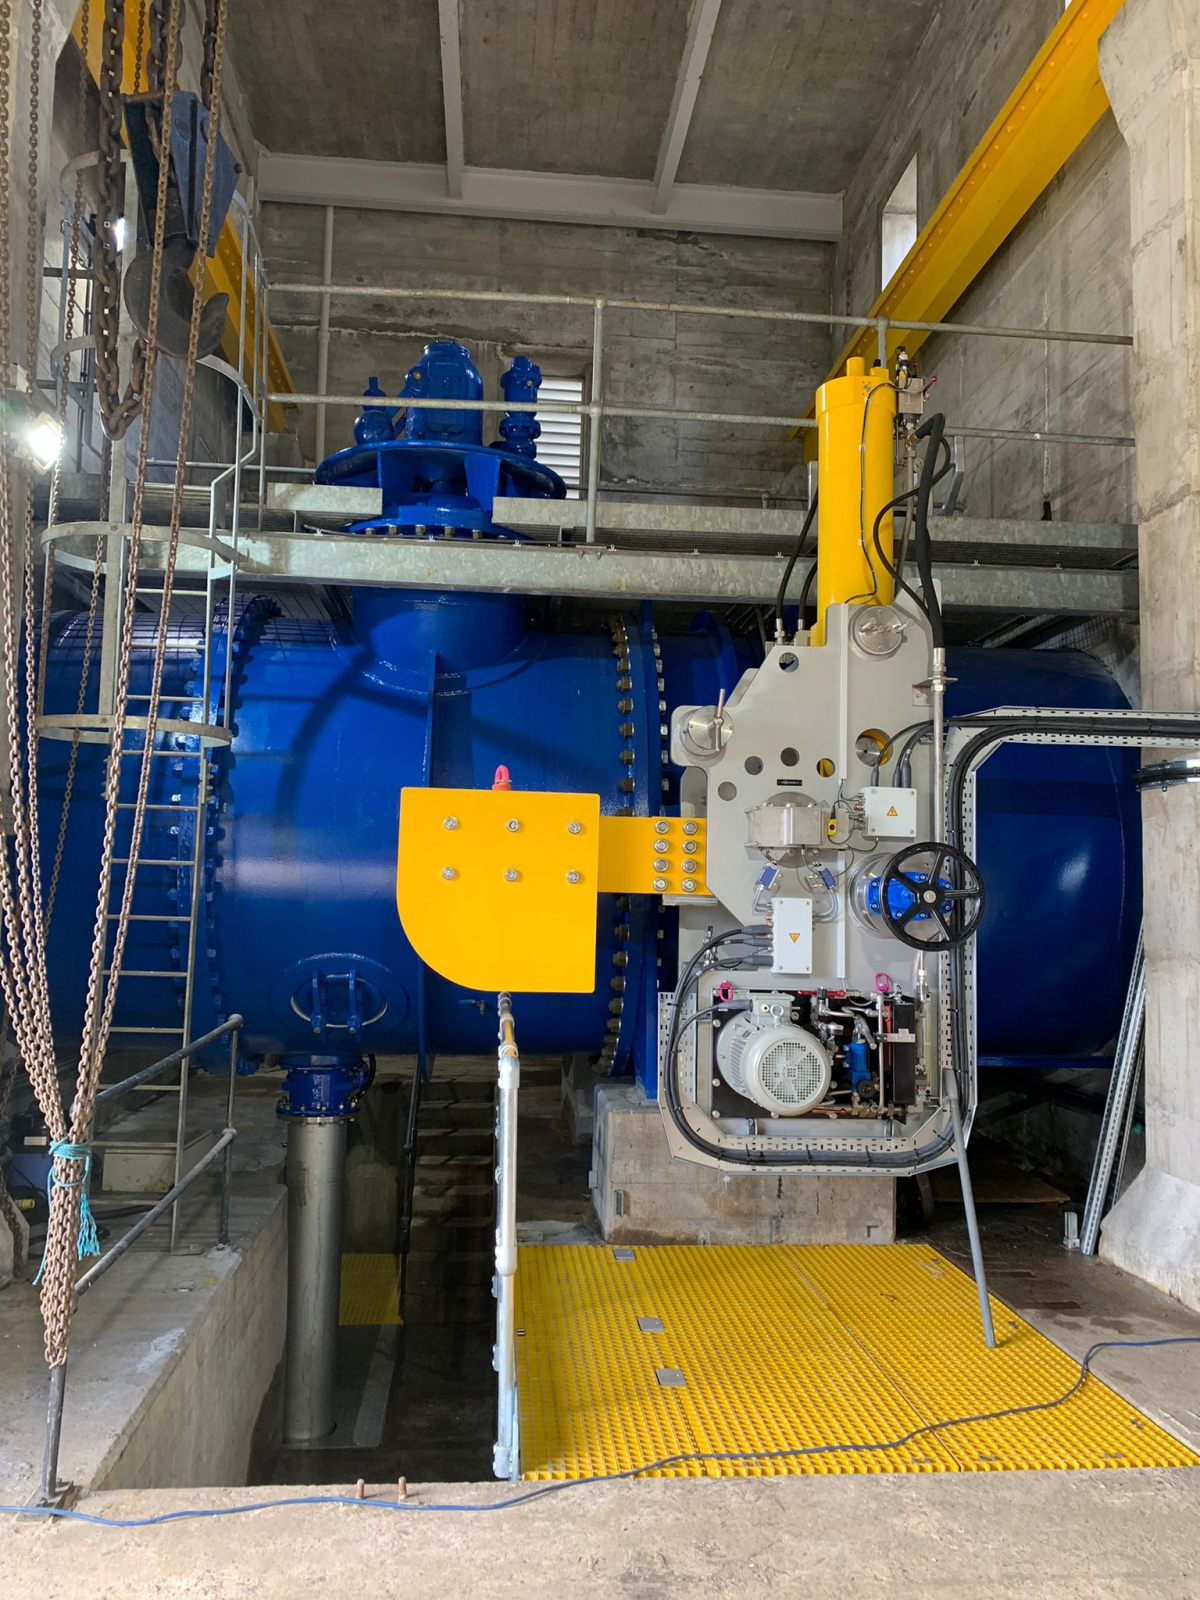 Completed valve installation following commissioning and infill flooring installation